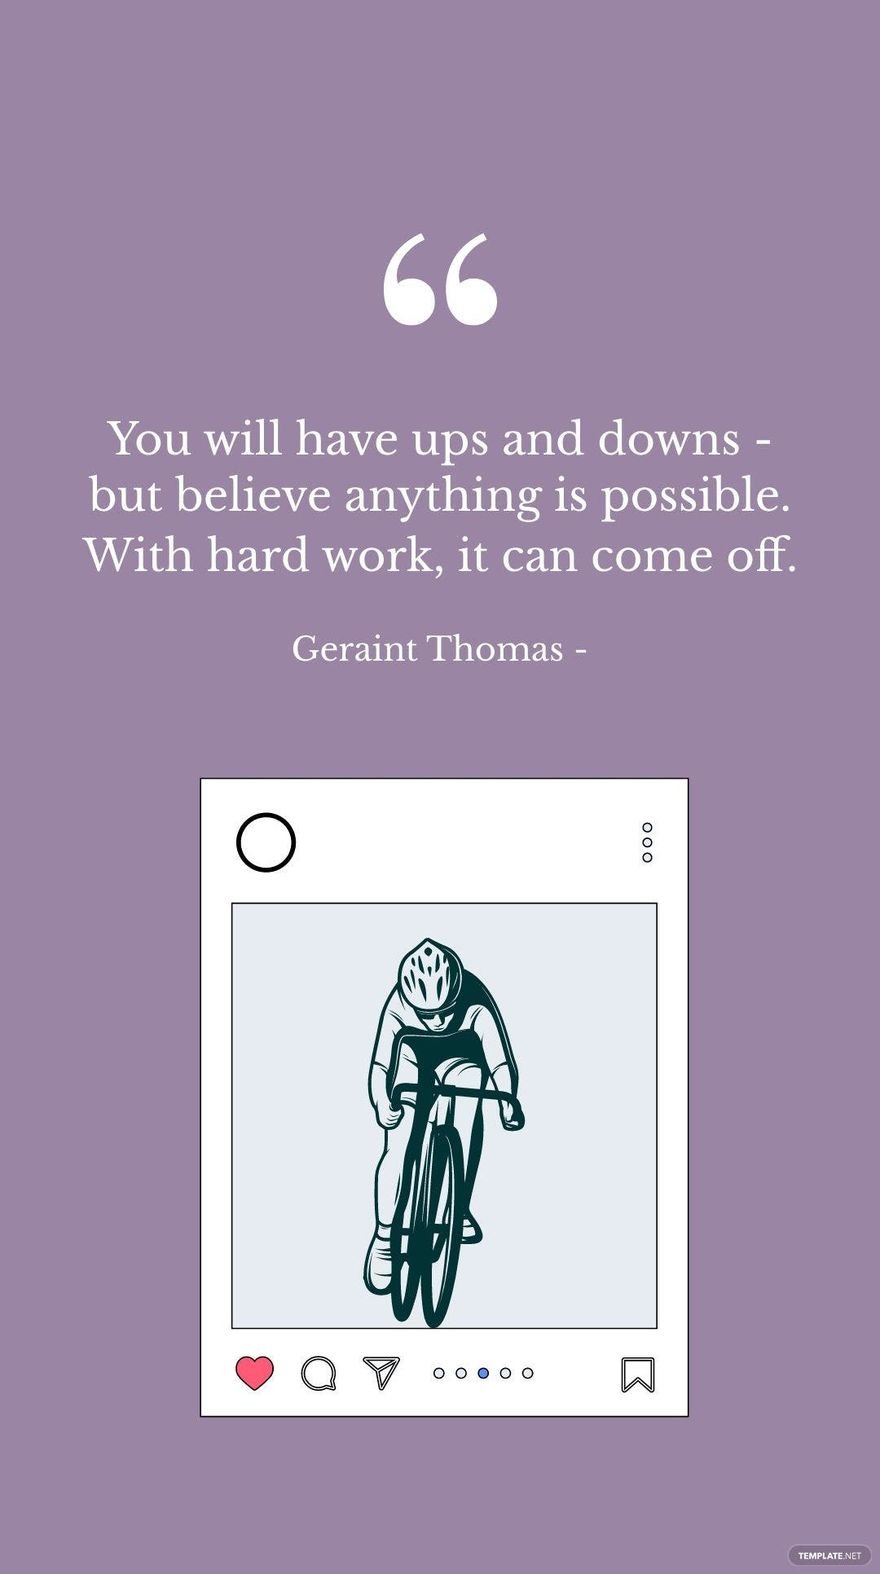 Free Geraint Thomas - You will have ups and downs - but believe anything is possible. With hard work, it can come off. in JPG